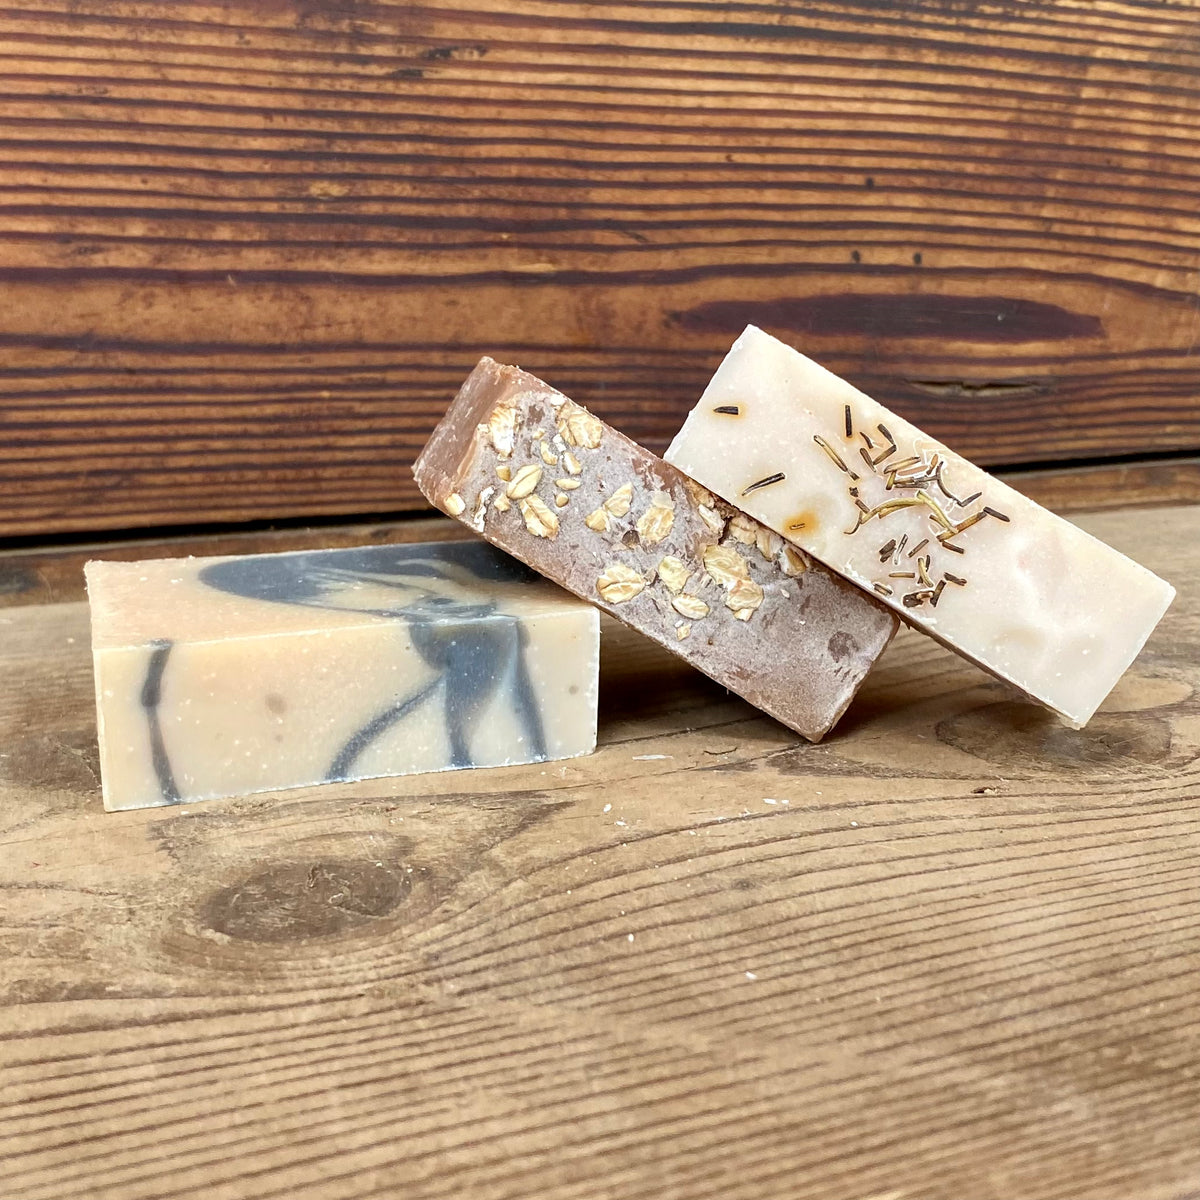 Two Old Goats Lotion Goat Milk Soap Bar - Fort Worth, TX - Handley's Feed  Store